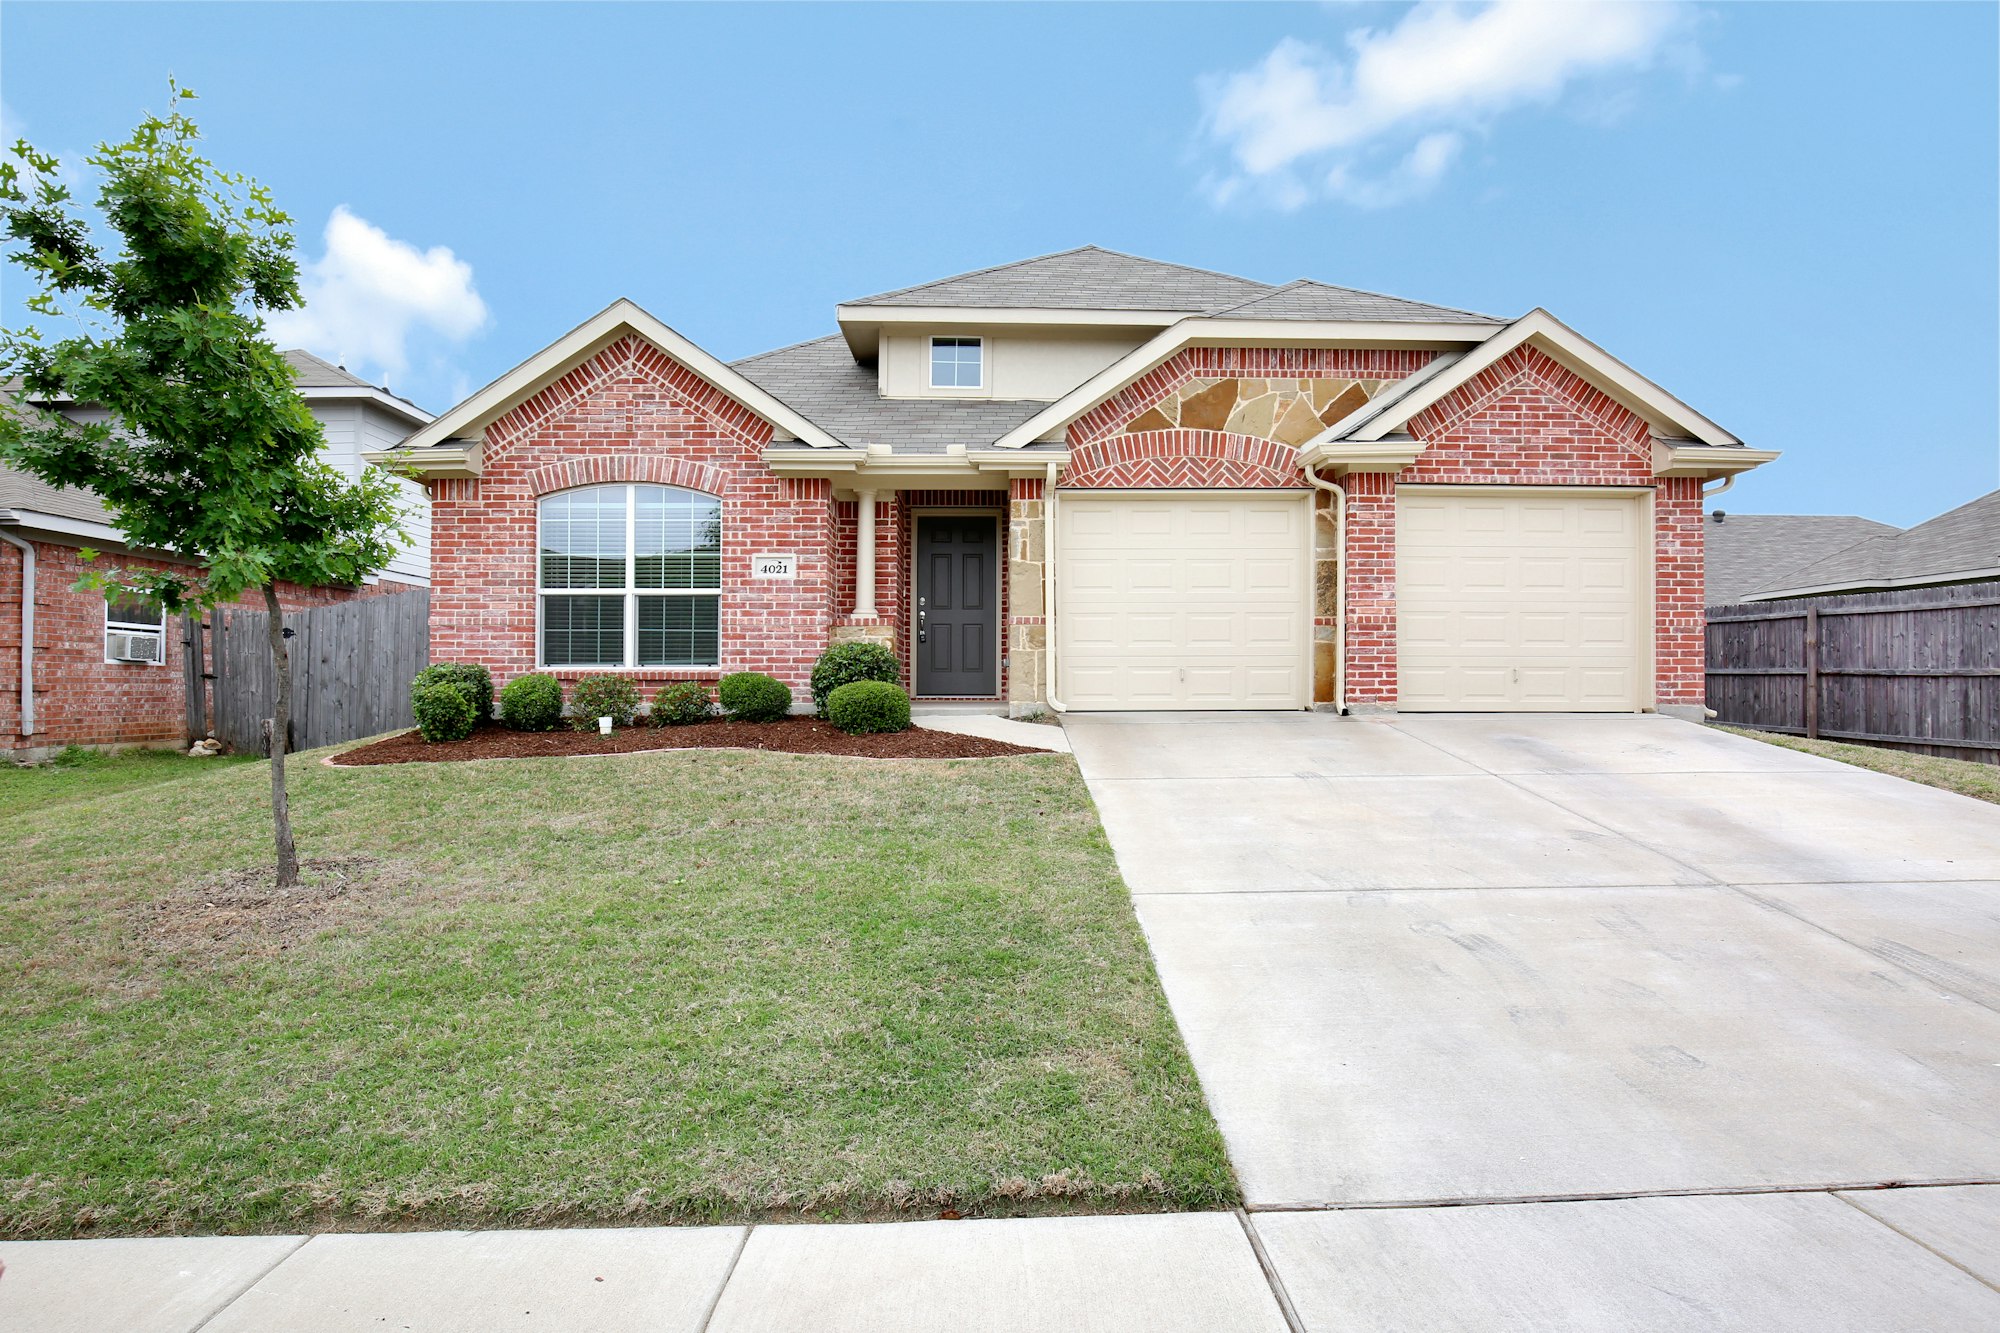 Photo 1 of 26 - 4021 Winter Springs Dr, Fort Worth, TX 76123